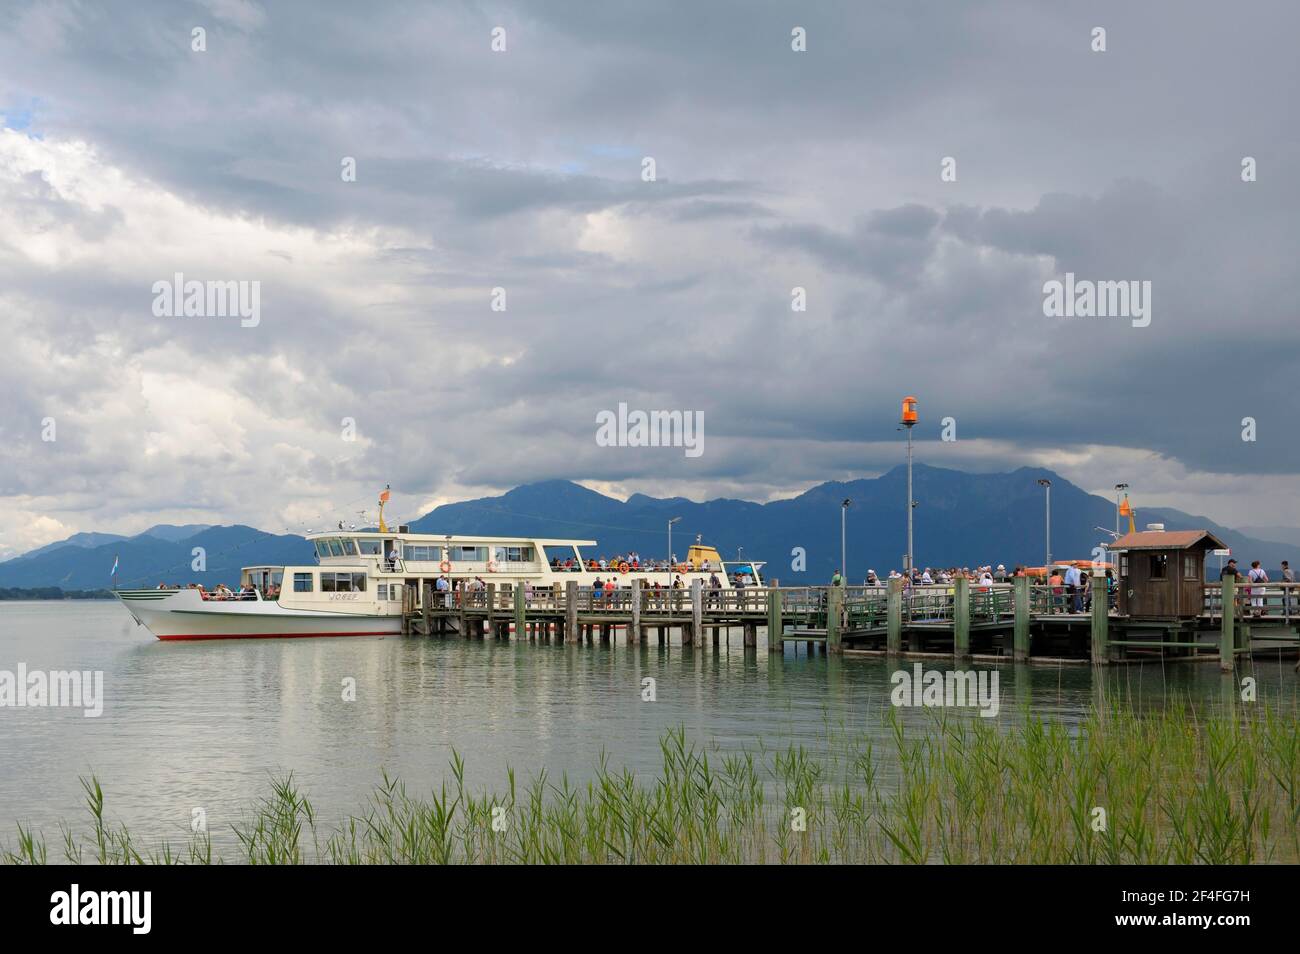 Jetty for excursion boats of the Chiemsee Schifffahrt, July, Fraueninsel, Chiemsee, Chiemgau, Bavaria, Germany Stock Photo